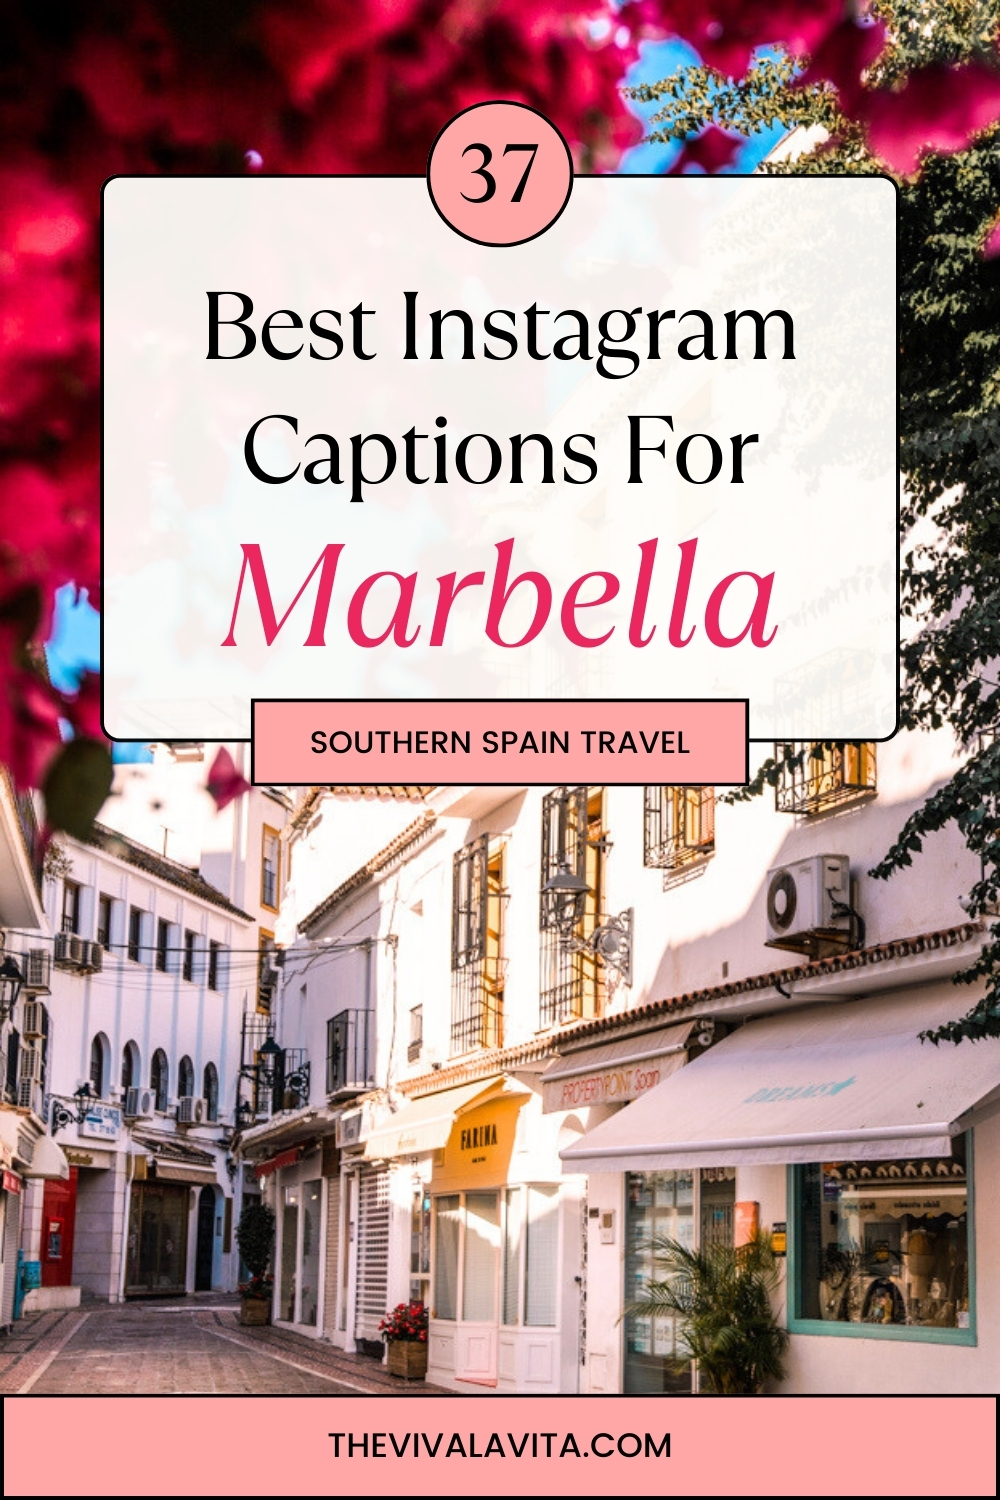 image of a street in Marbella old town, in Southern Spain, with the headline: instagram captions marbella, southern spain travel